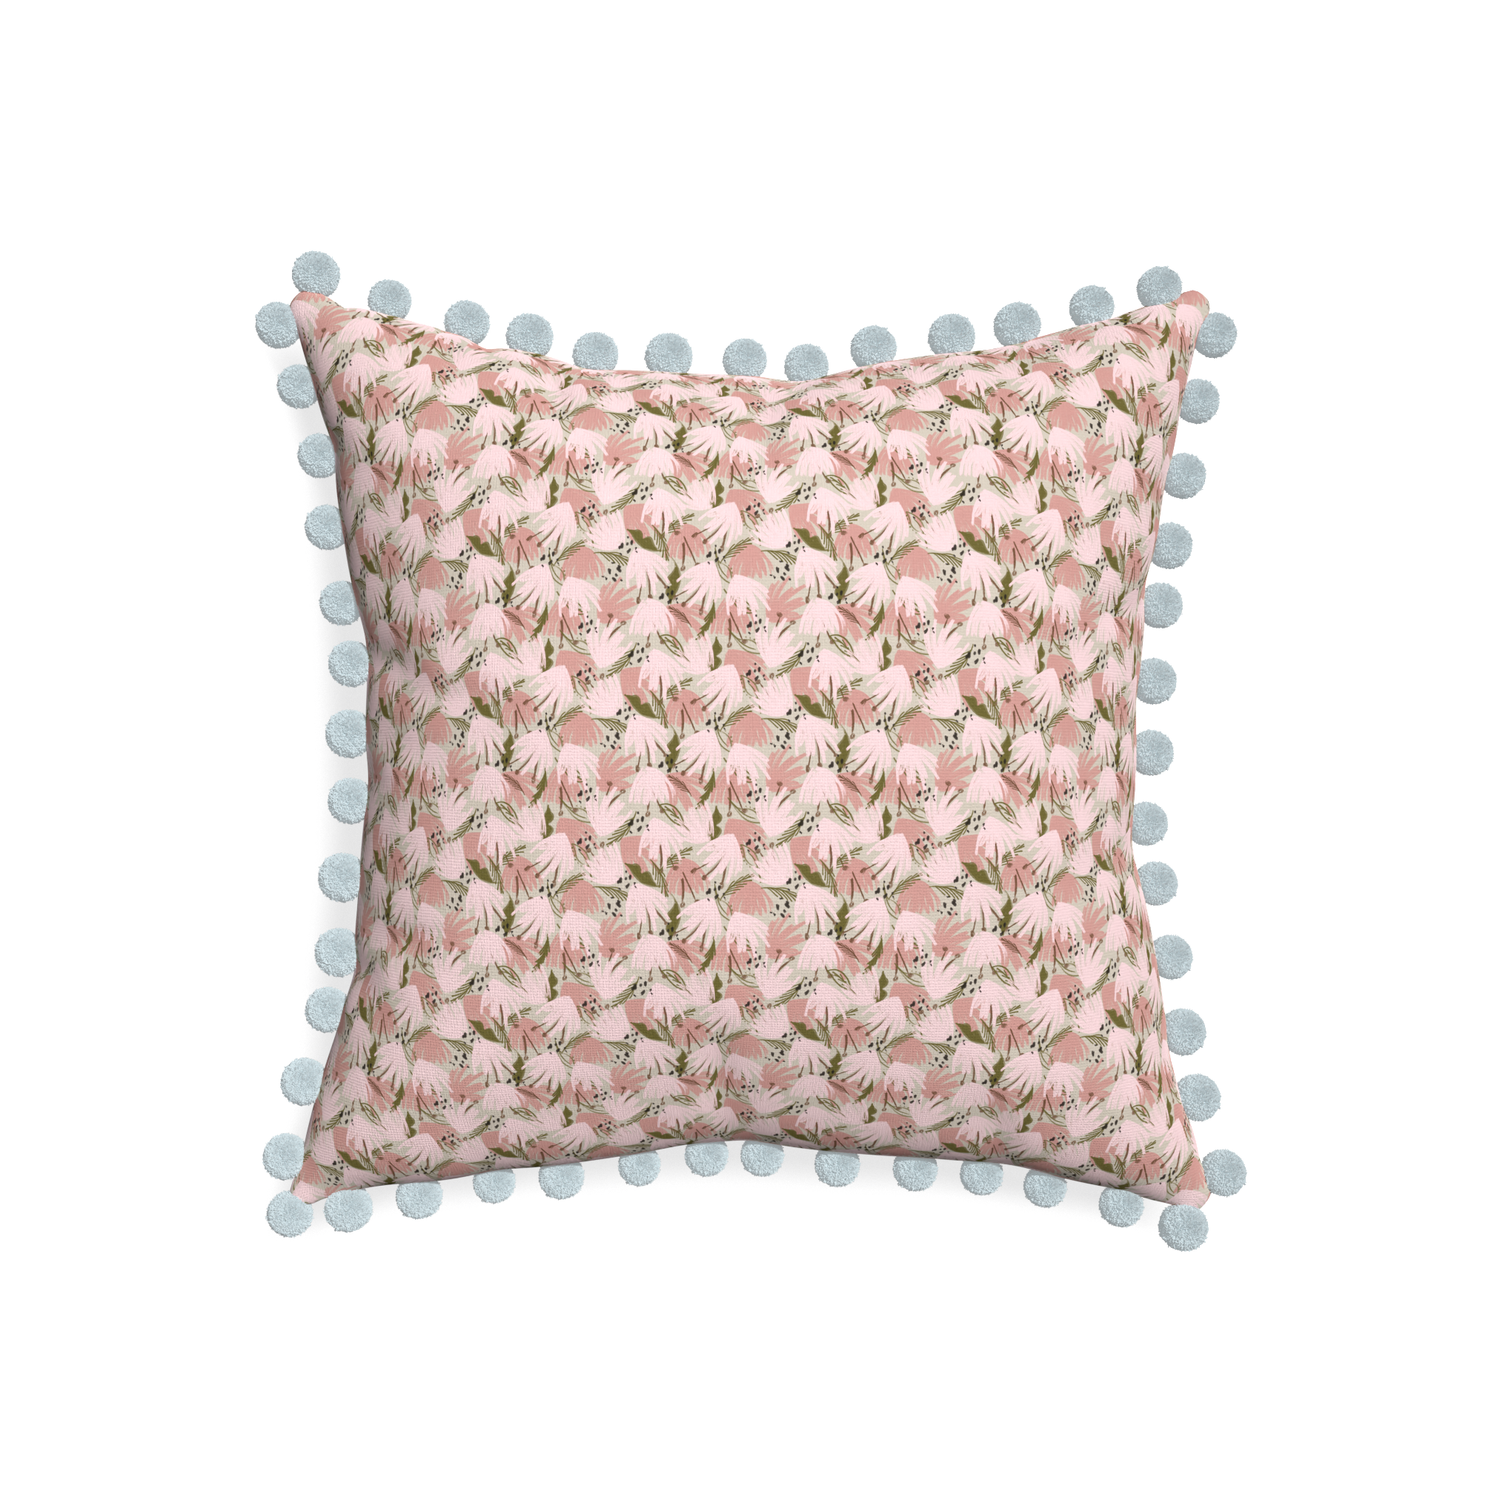 20-square eden pink custom pink floralpillow with powder pom pom on white background